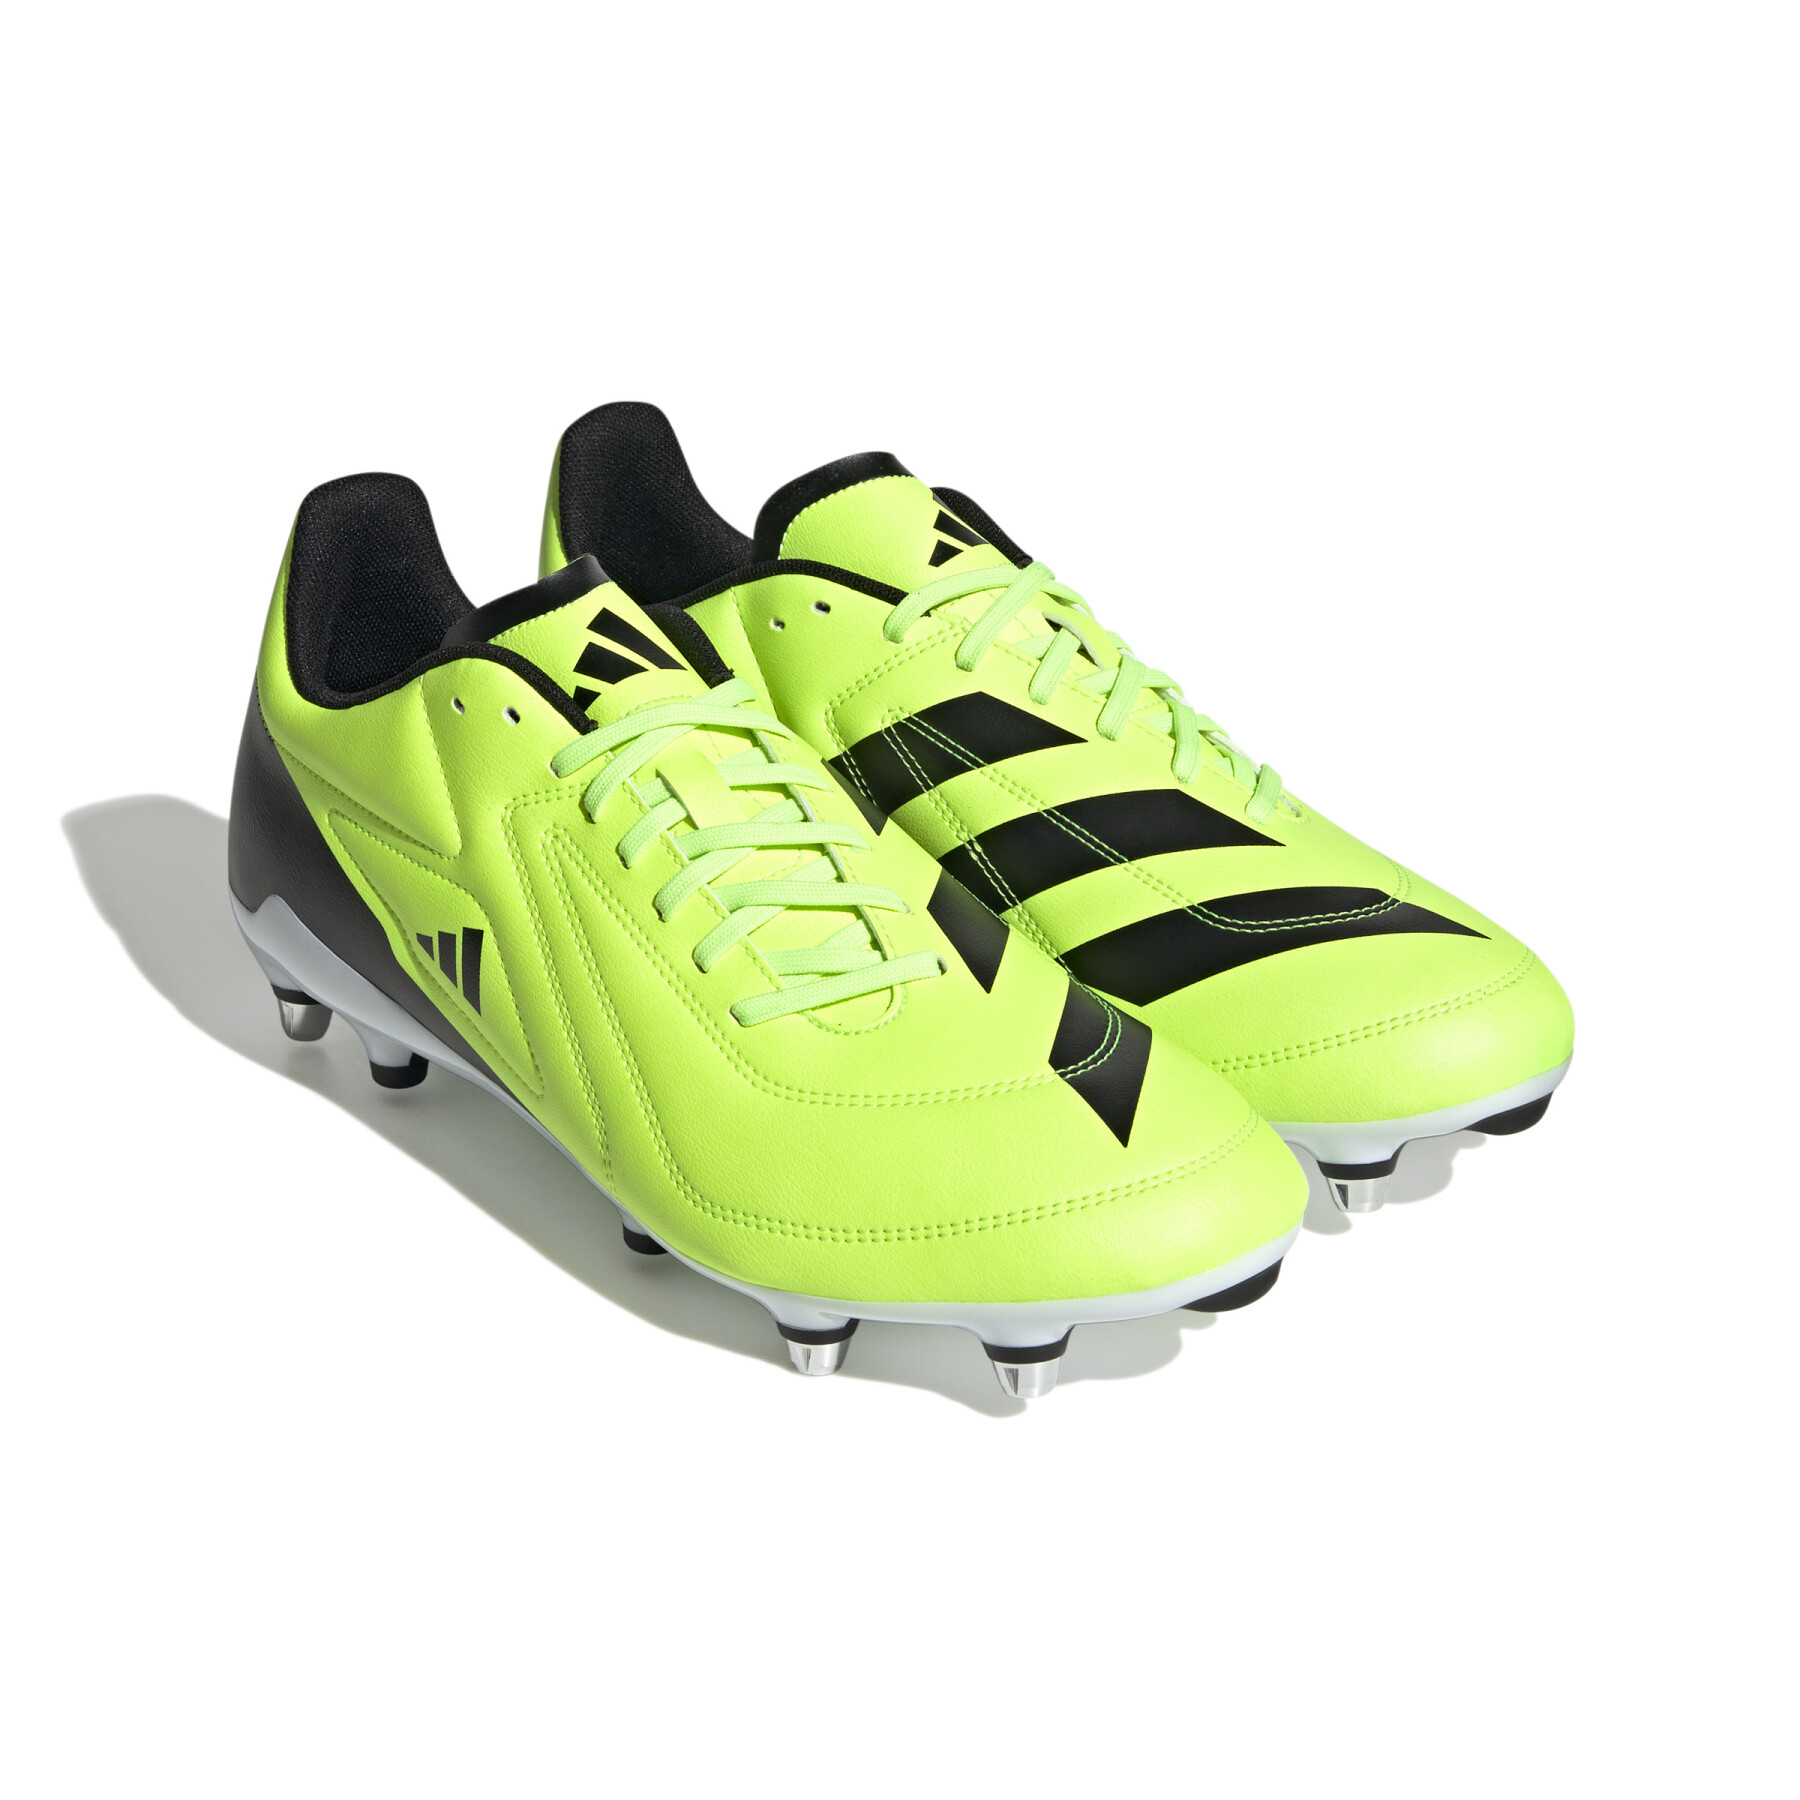 Chaussures de rugby adidas RS-15 SG